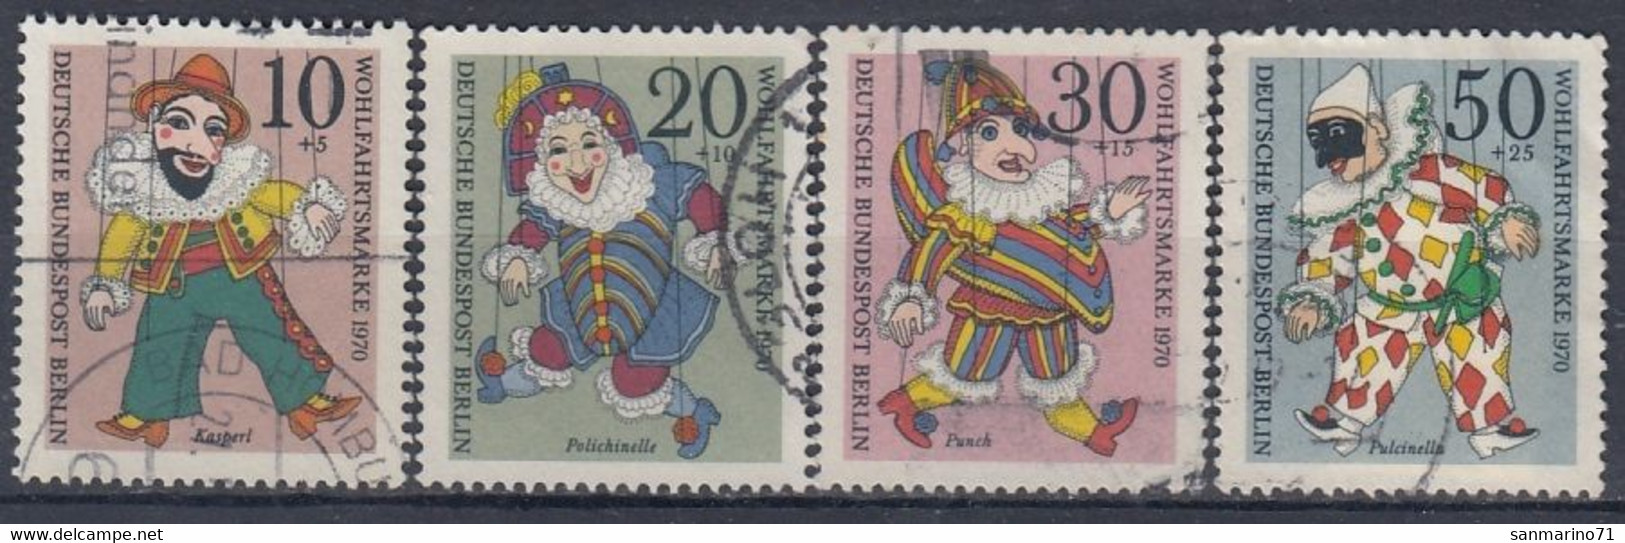 GERMANY Berlin 373-376,used - Puppets